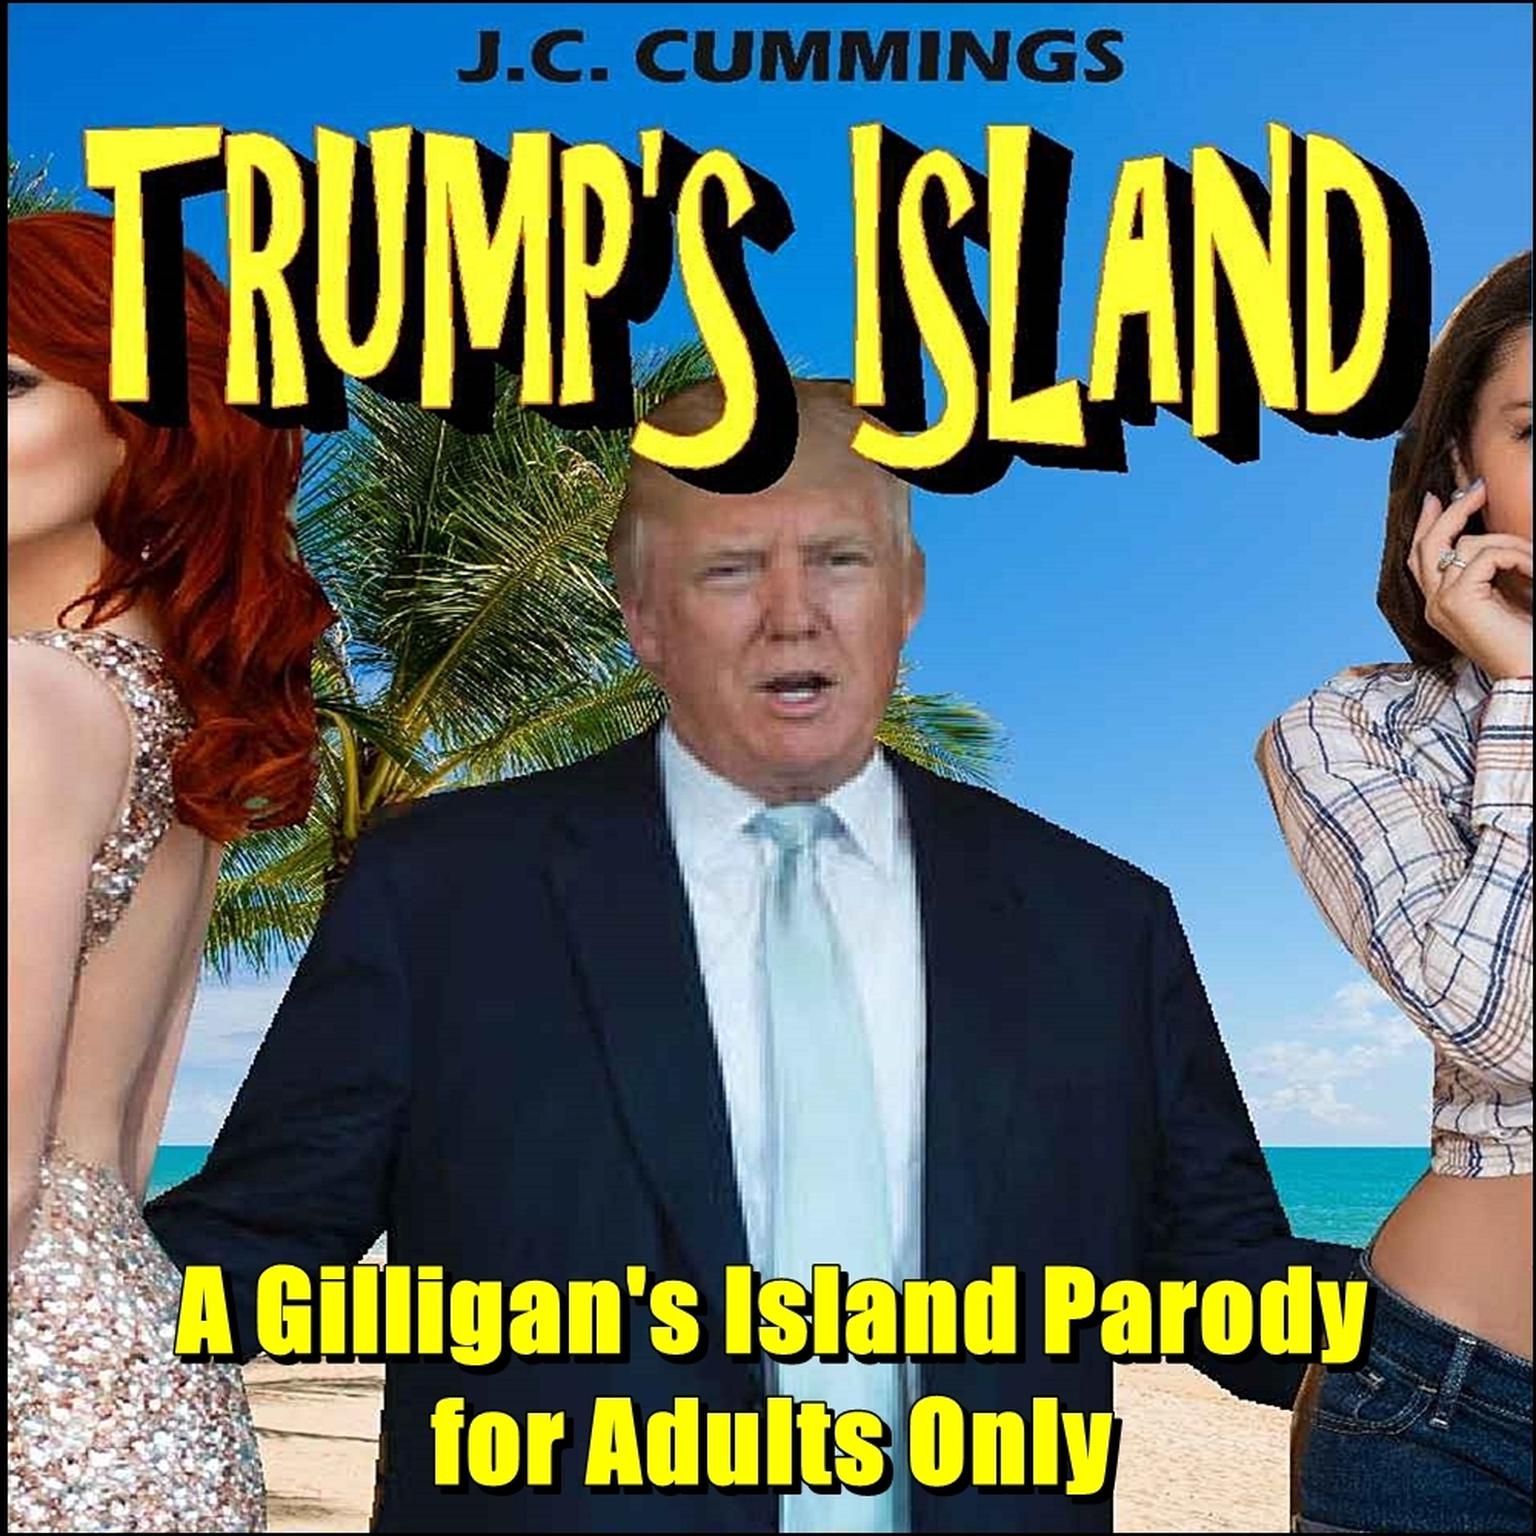 Trumps Island: A Gilligan’s Island Parody for Adults Only Audiobook, by J.C. Cummings